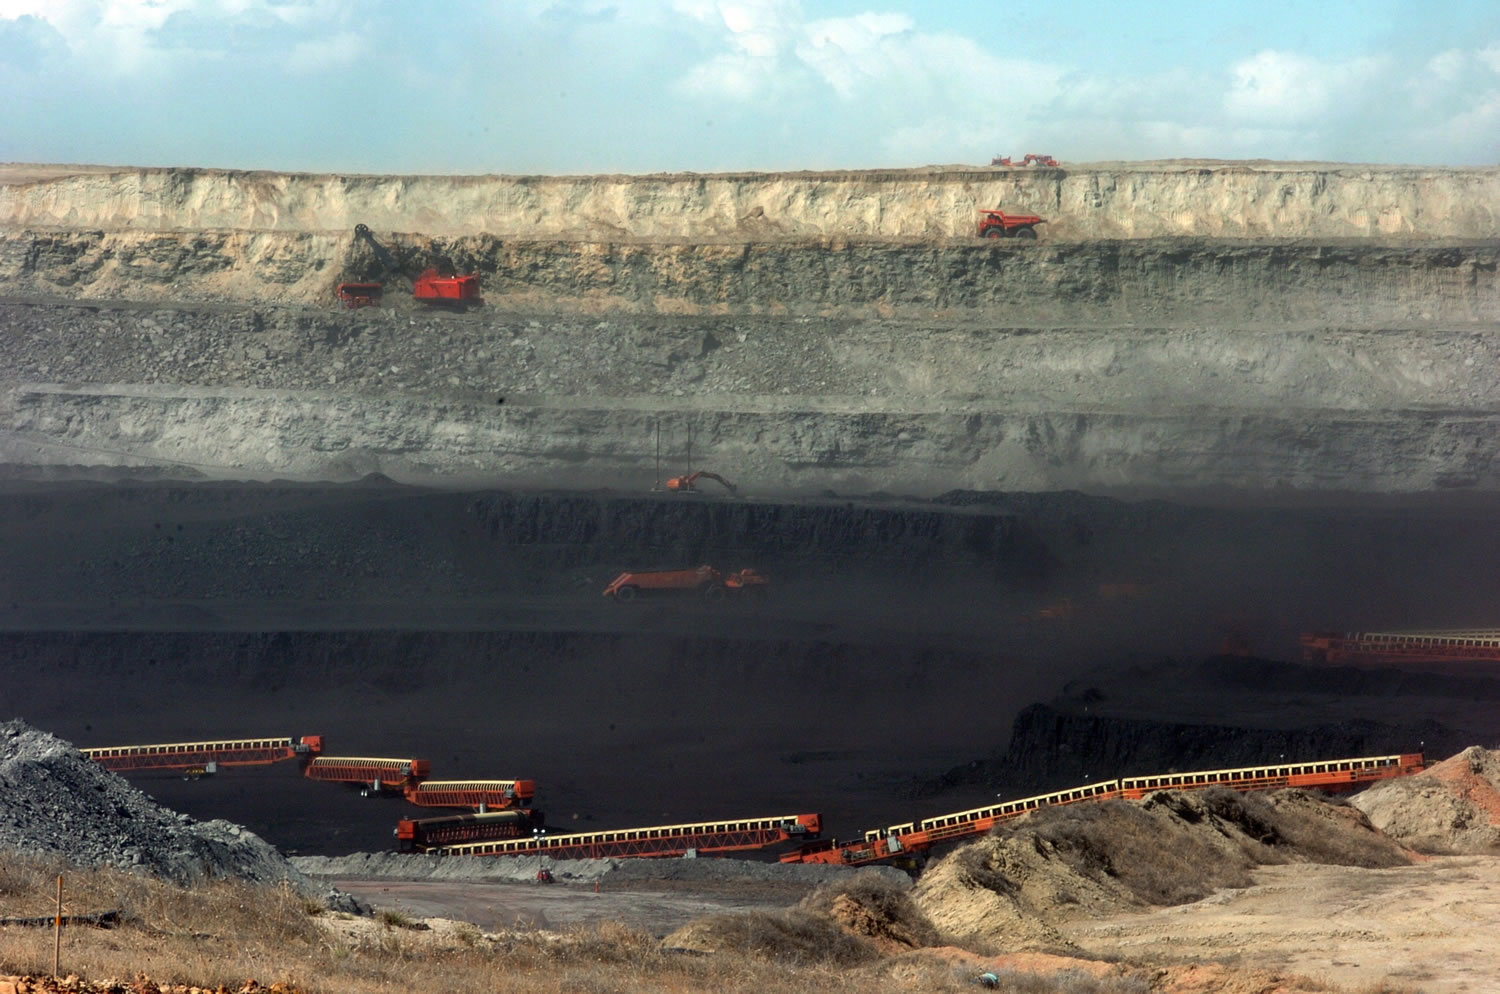 Conveyor belts and heavy equipment remove coal from the Wyodak Resources mine in northeastern Wyoming for delivery to a nearby Black Hills Power coal plant complex in Wyodak, Wyo., in 2010.